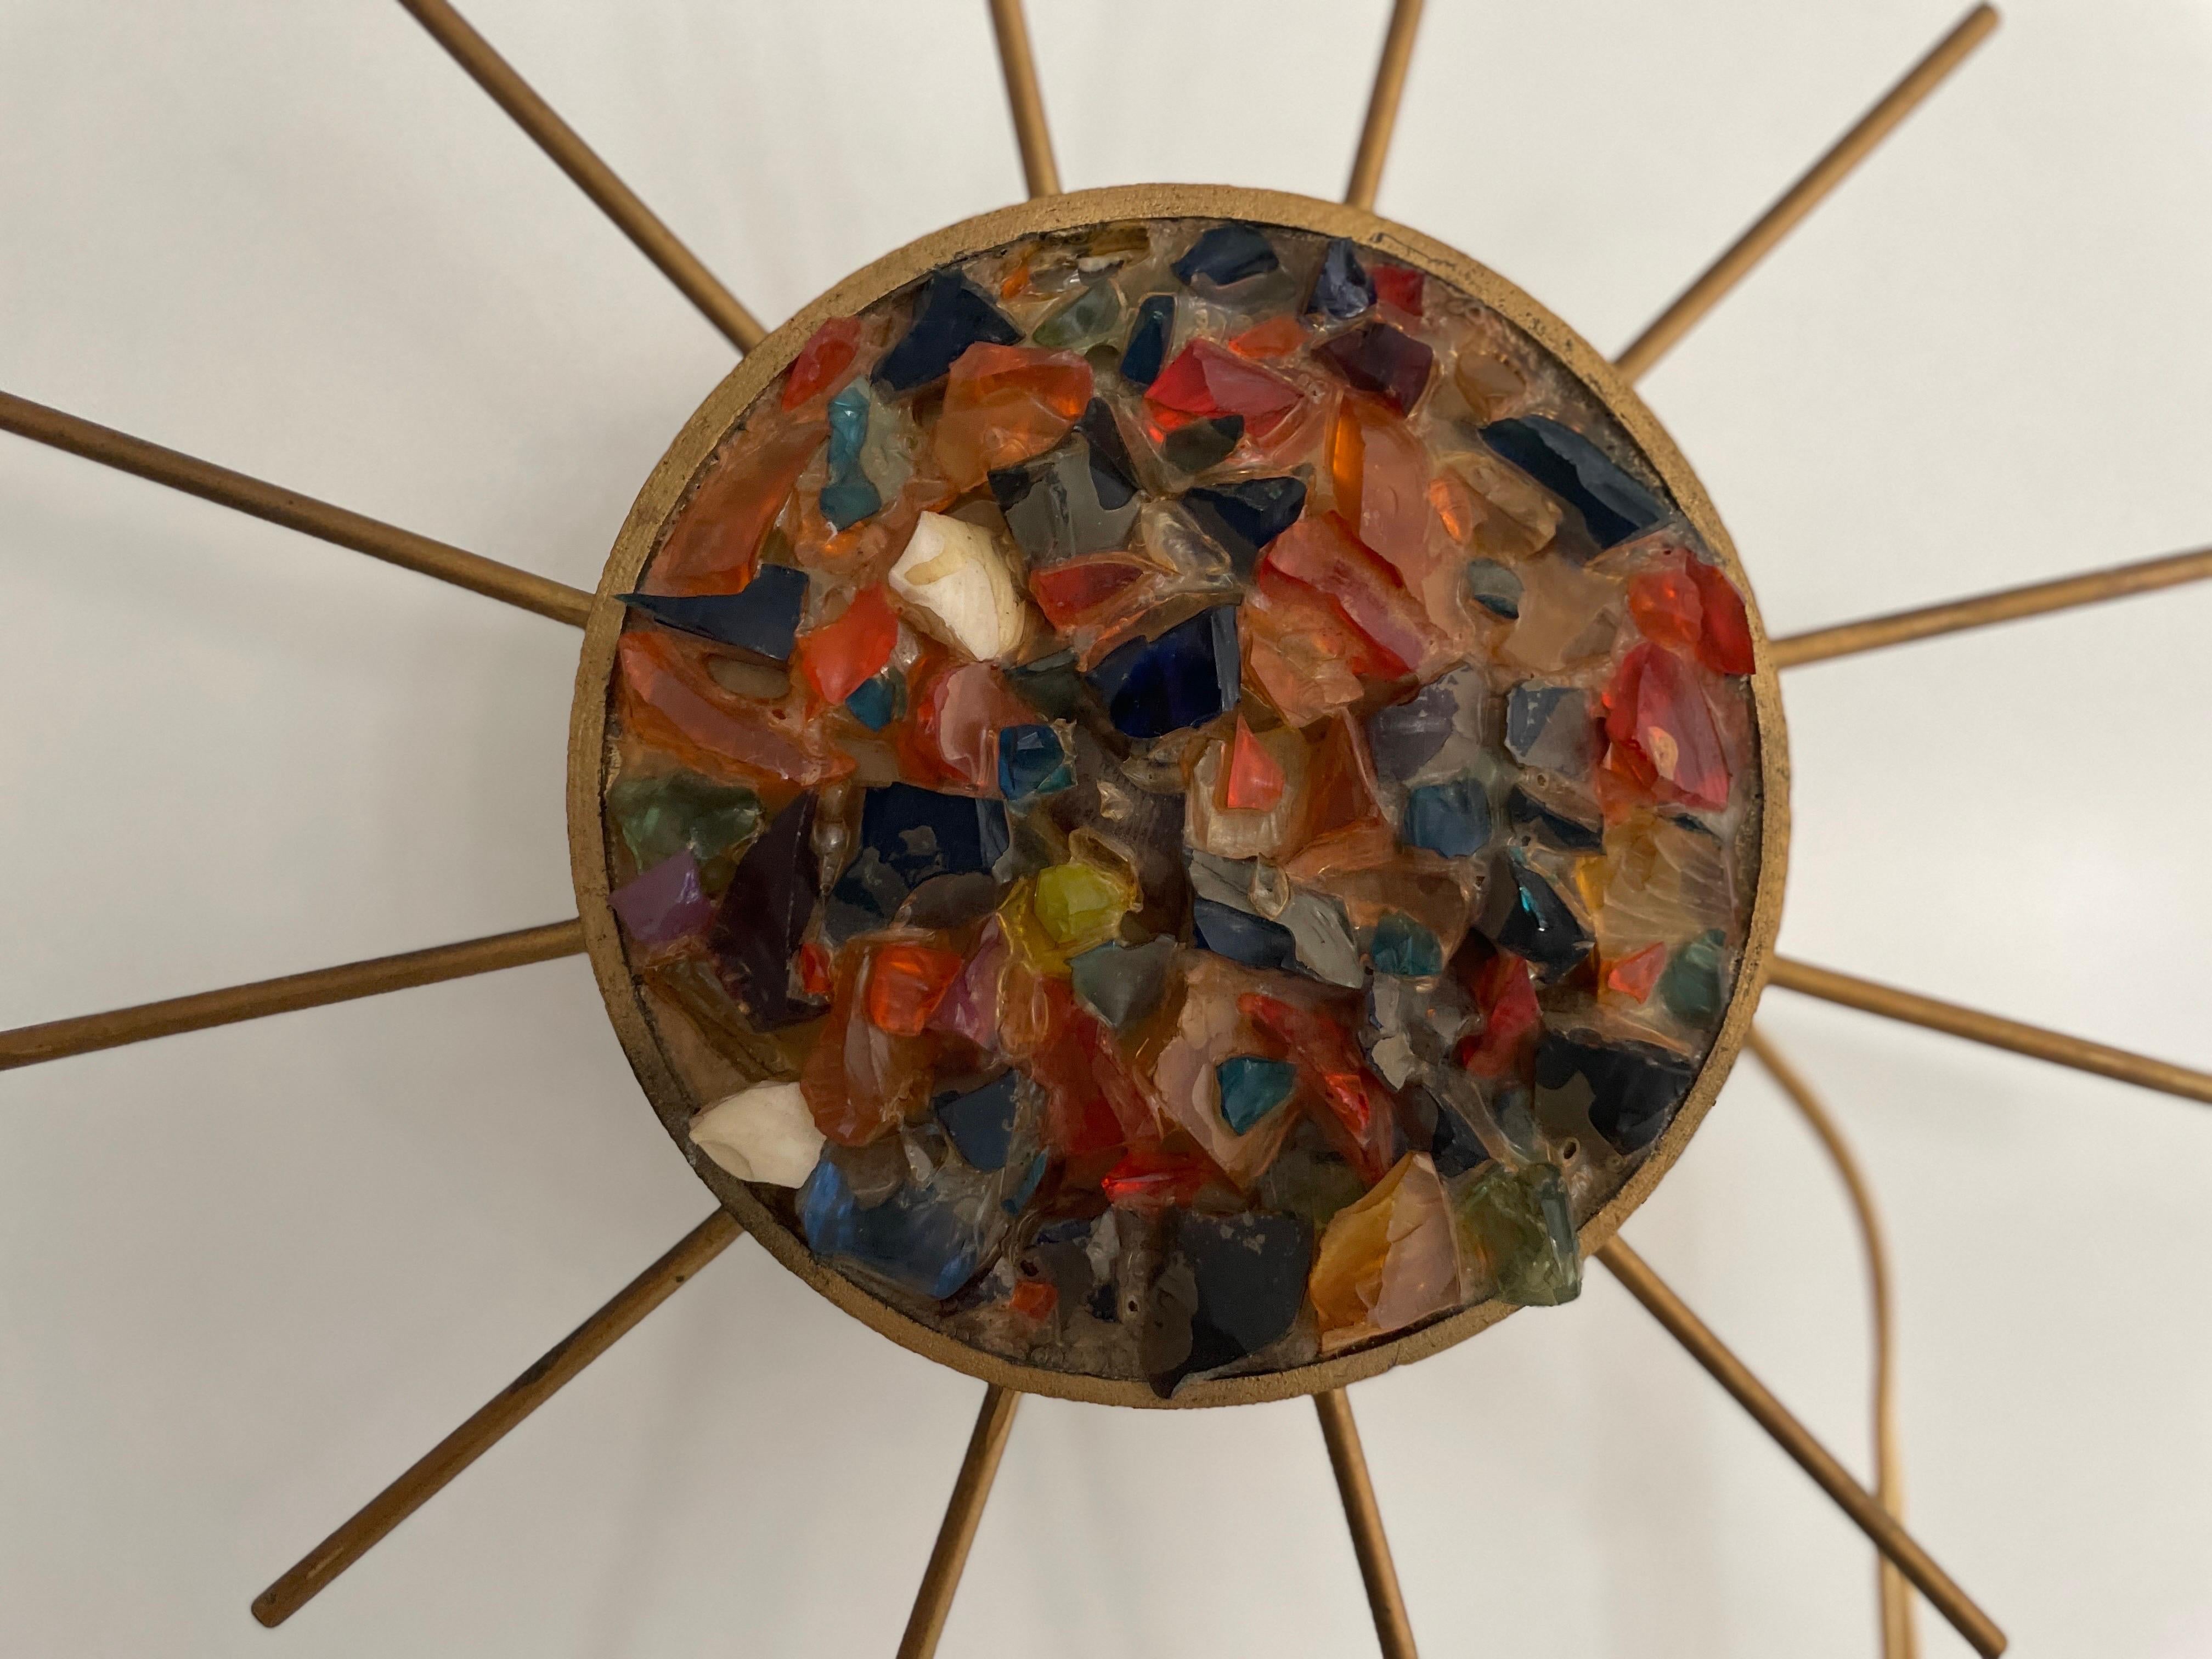 Sunburst Design Colorful Glass Pieces in Stone Form Wall Lamp, 1960s, Germany In Excellent Condition For Sale In Hagenbach, DE